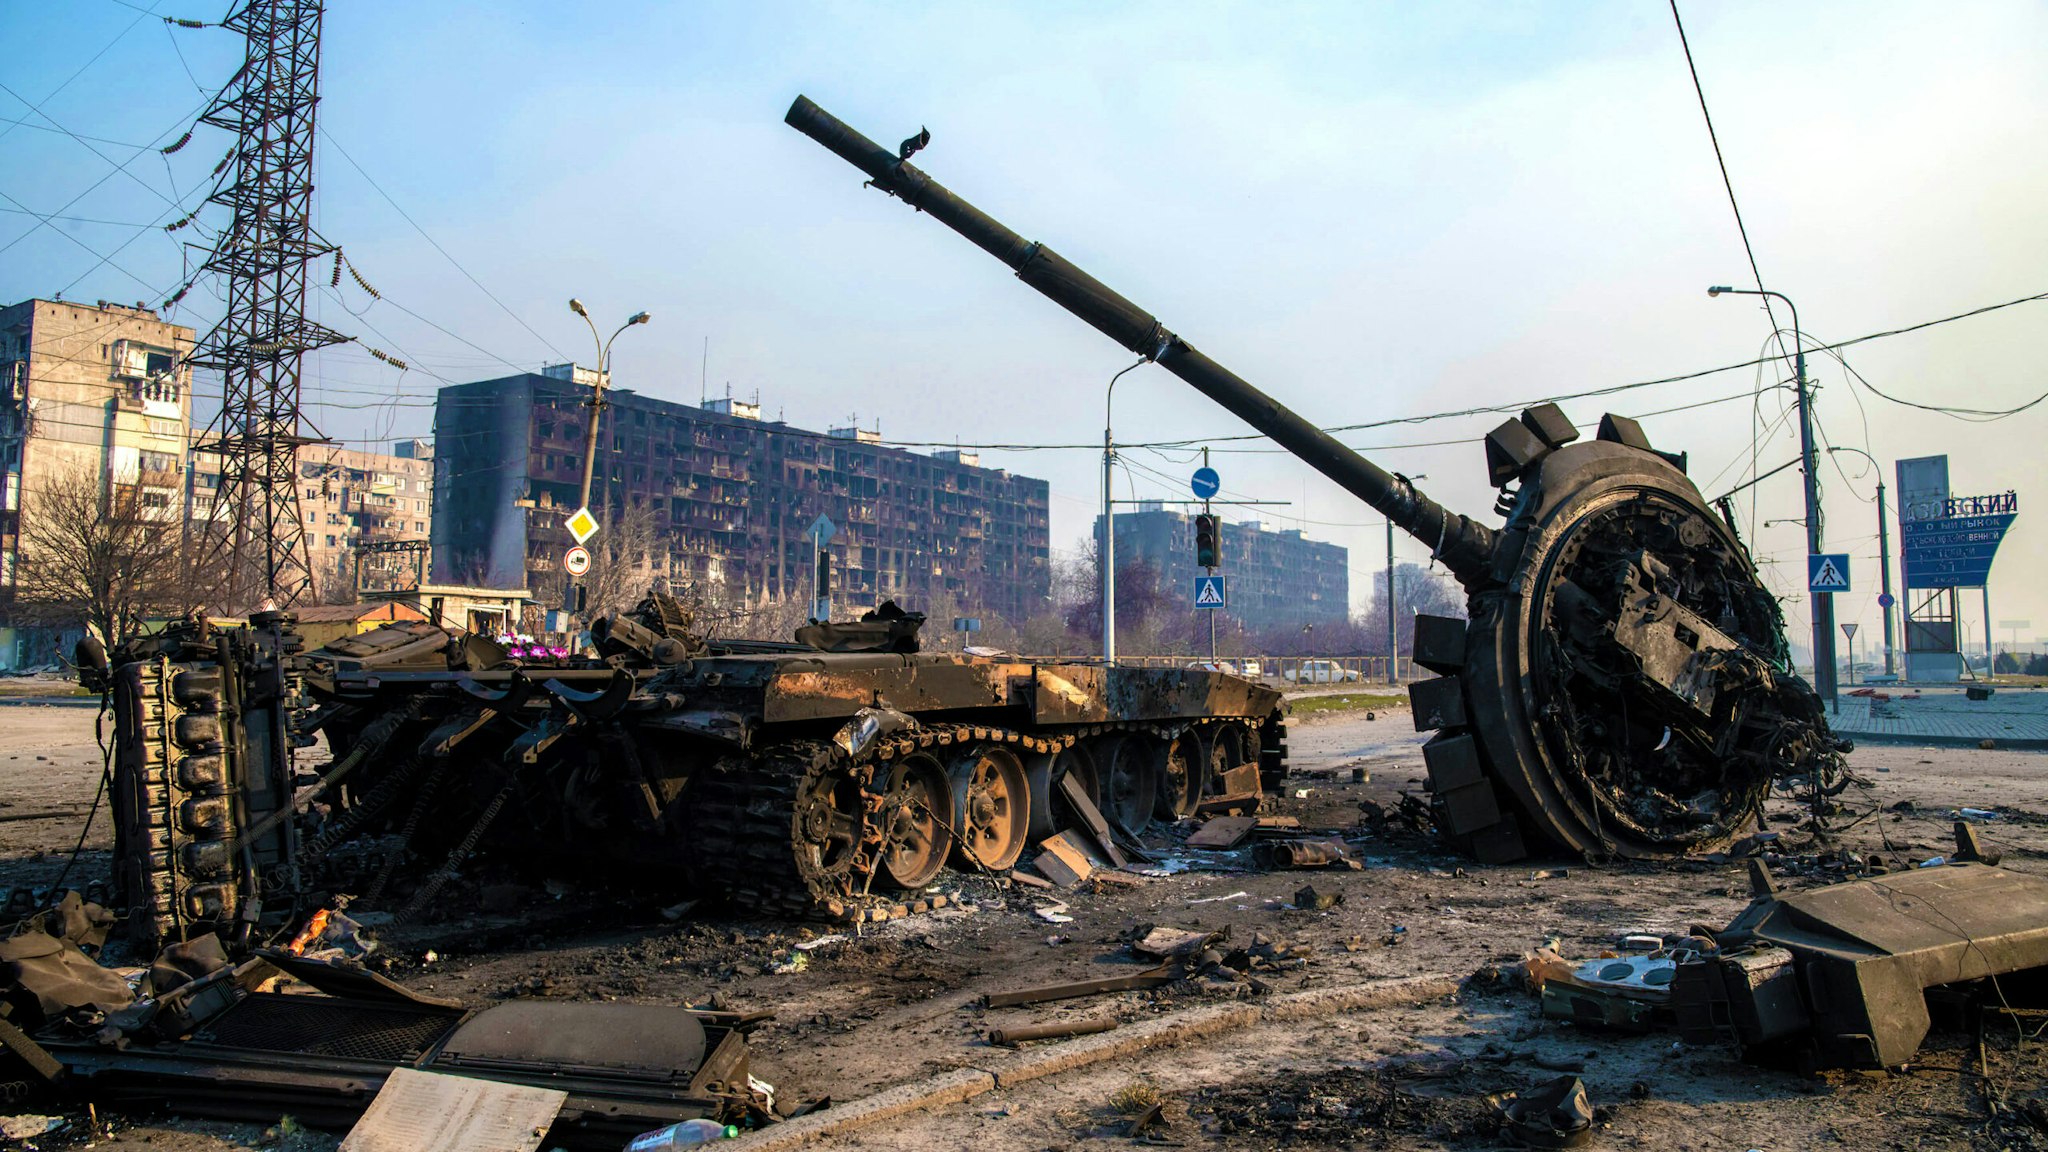 MARIUPOL, UKRAINE - 2022/03/23: A destroyed tank likely belonging to Russia / pro-Russian forces lies amidst rubble in the north of the ruined city. The battle between Russian / Pro Russian forces and the defencing Ukrainian forces lead by Azov battalion continues in the port city of Mariupol.